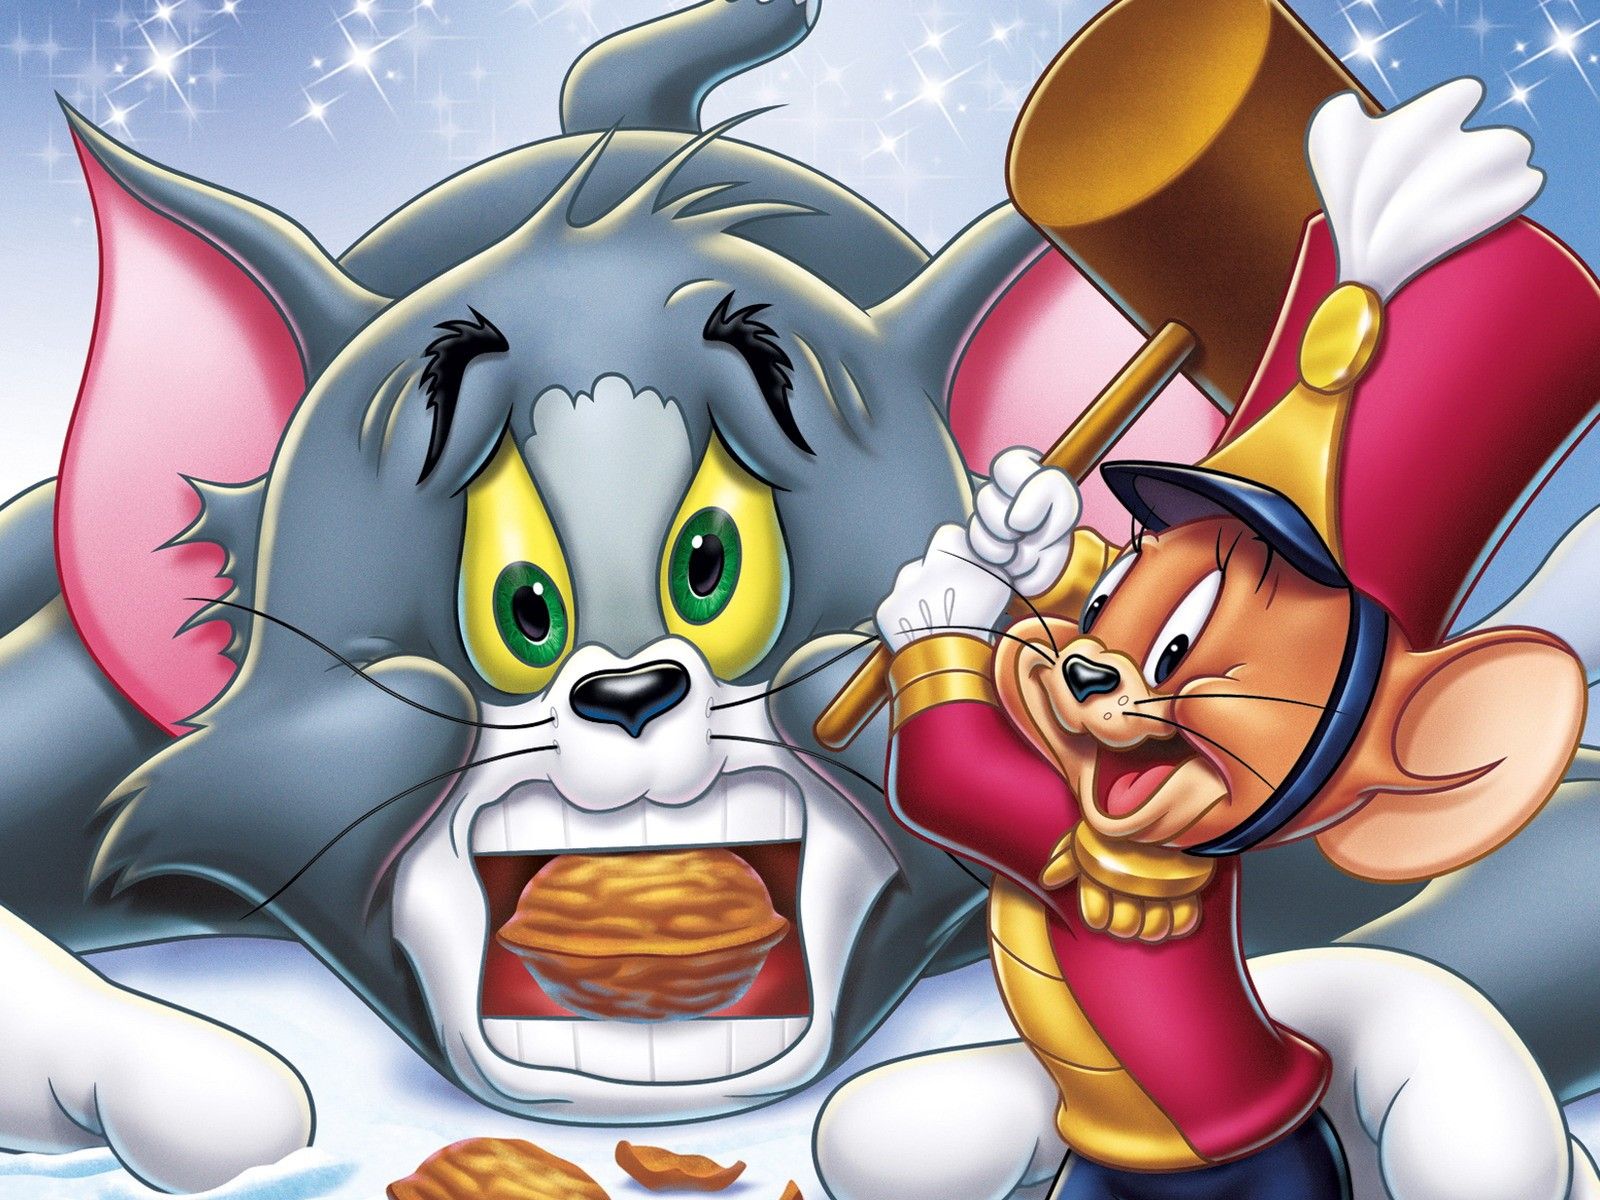 jerry funny wallpaper HD free image tom and jerry funny